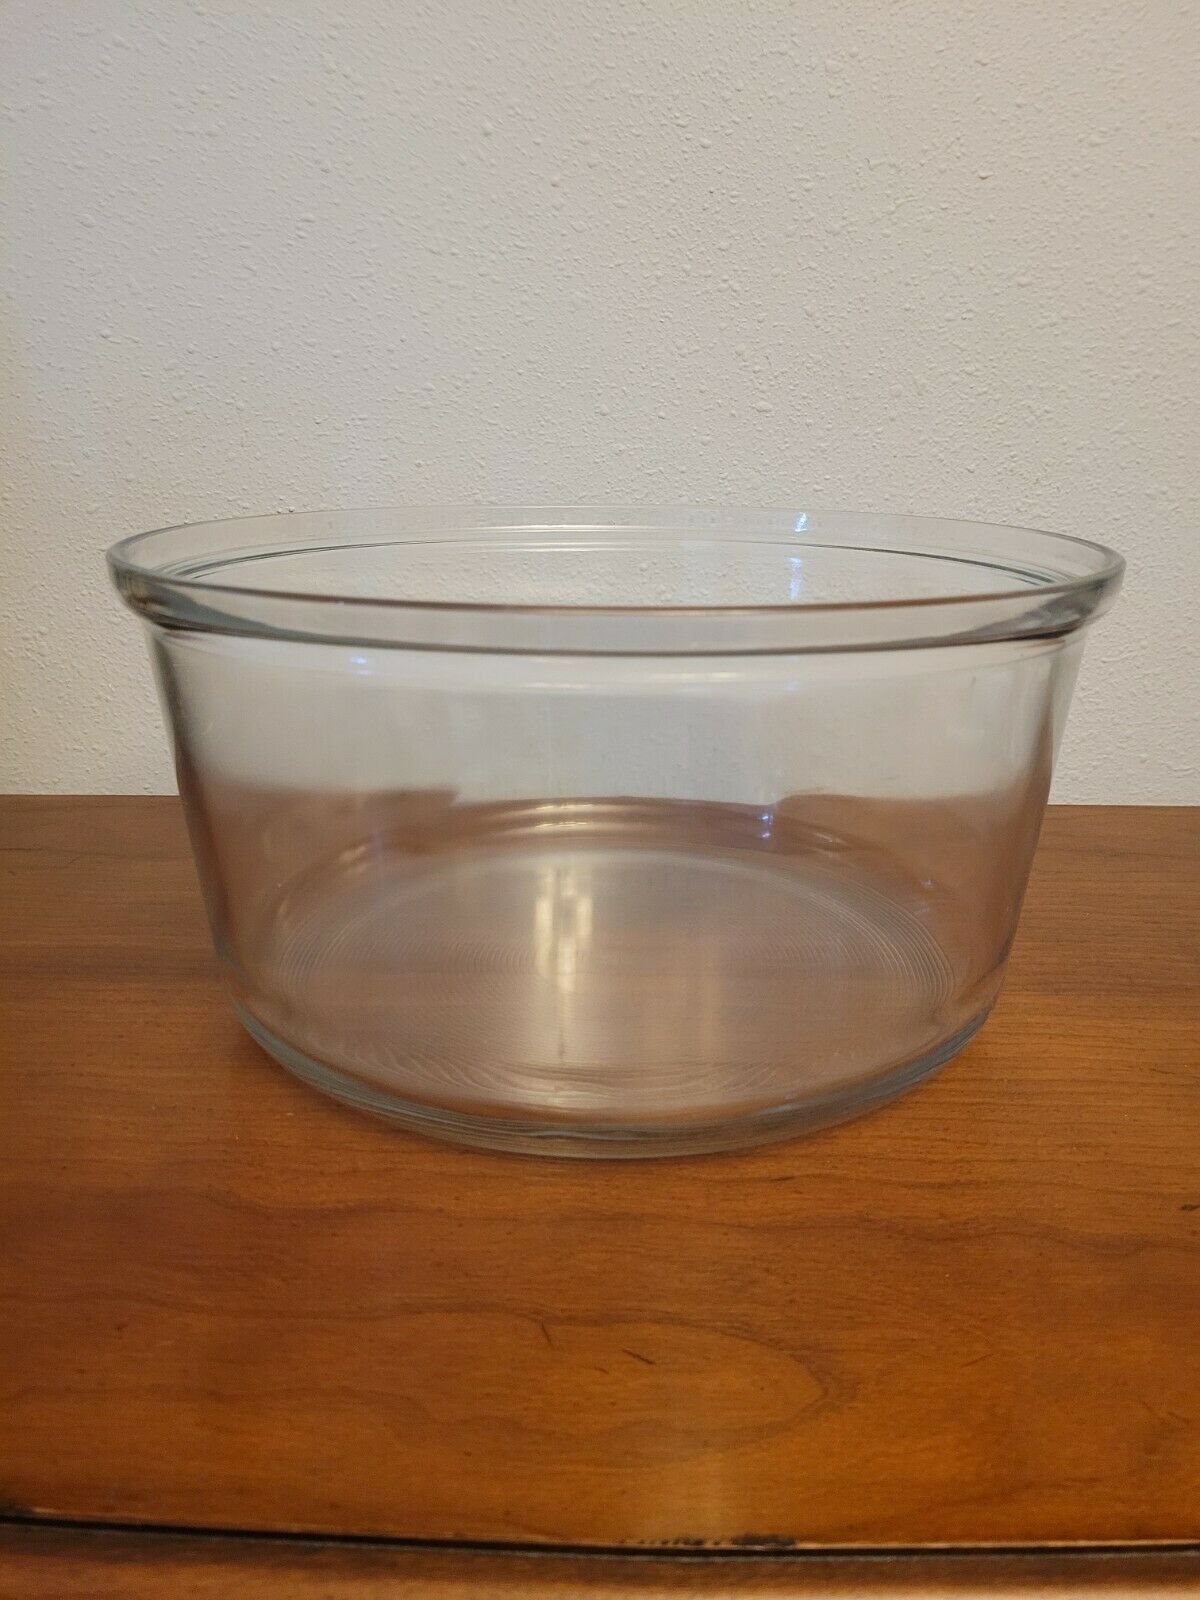 Sharper Image Super Wave Oven 8217 Replacement Glass Bowl.